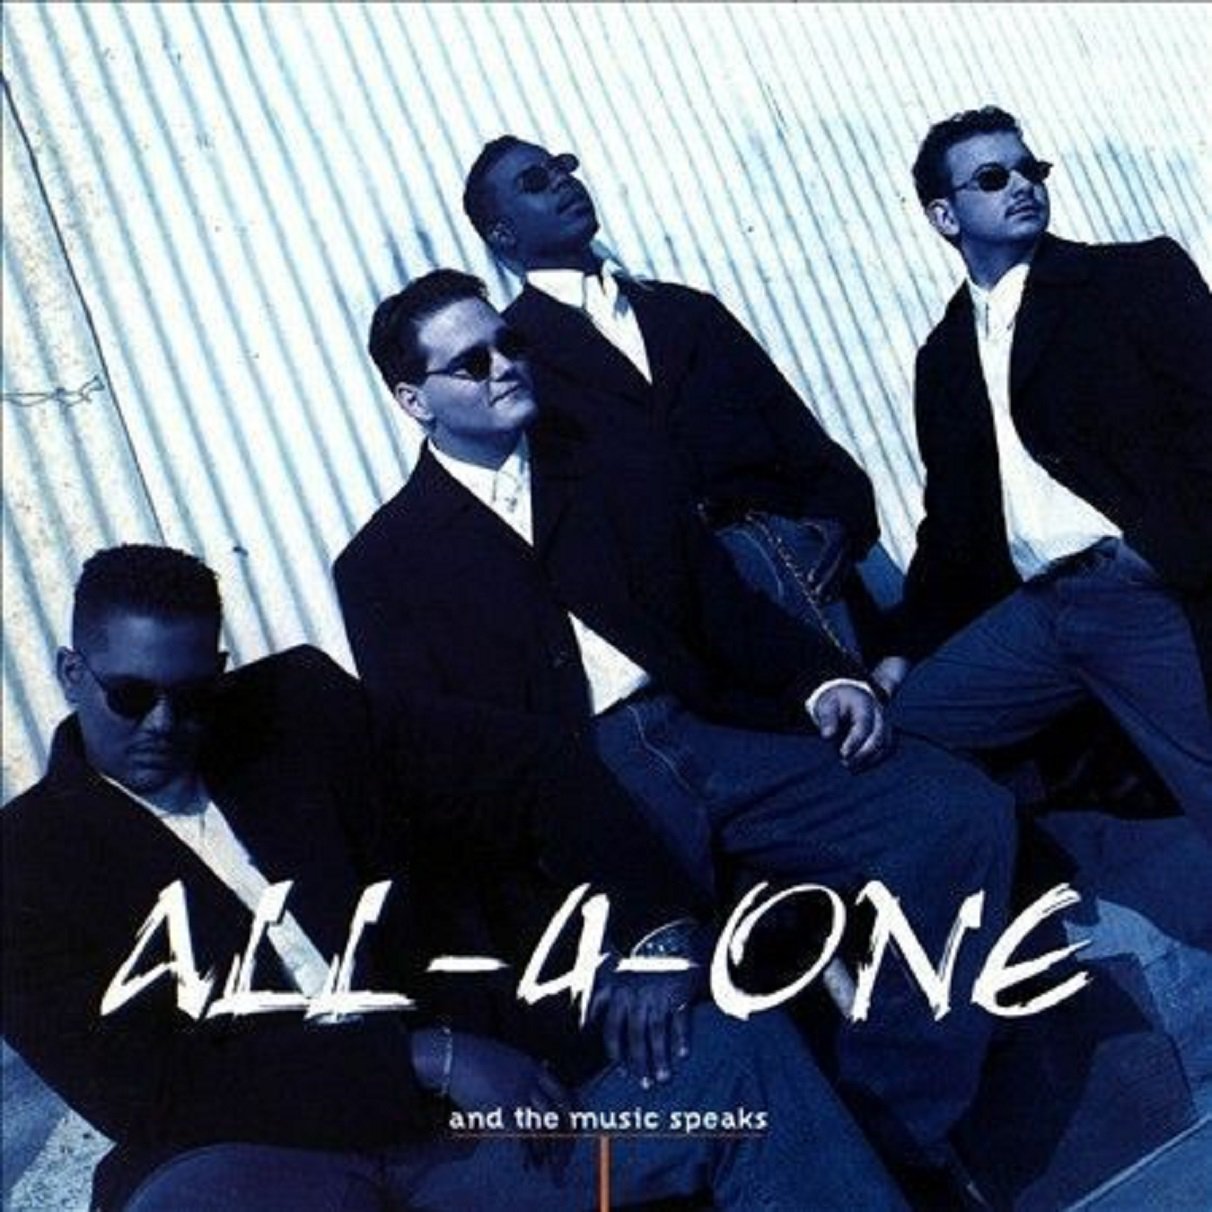 Speak музыка. One4all. All 4 one фото. All for one группа. And one альбомы.